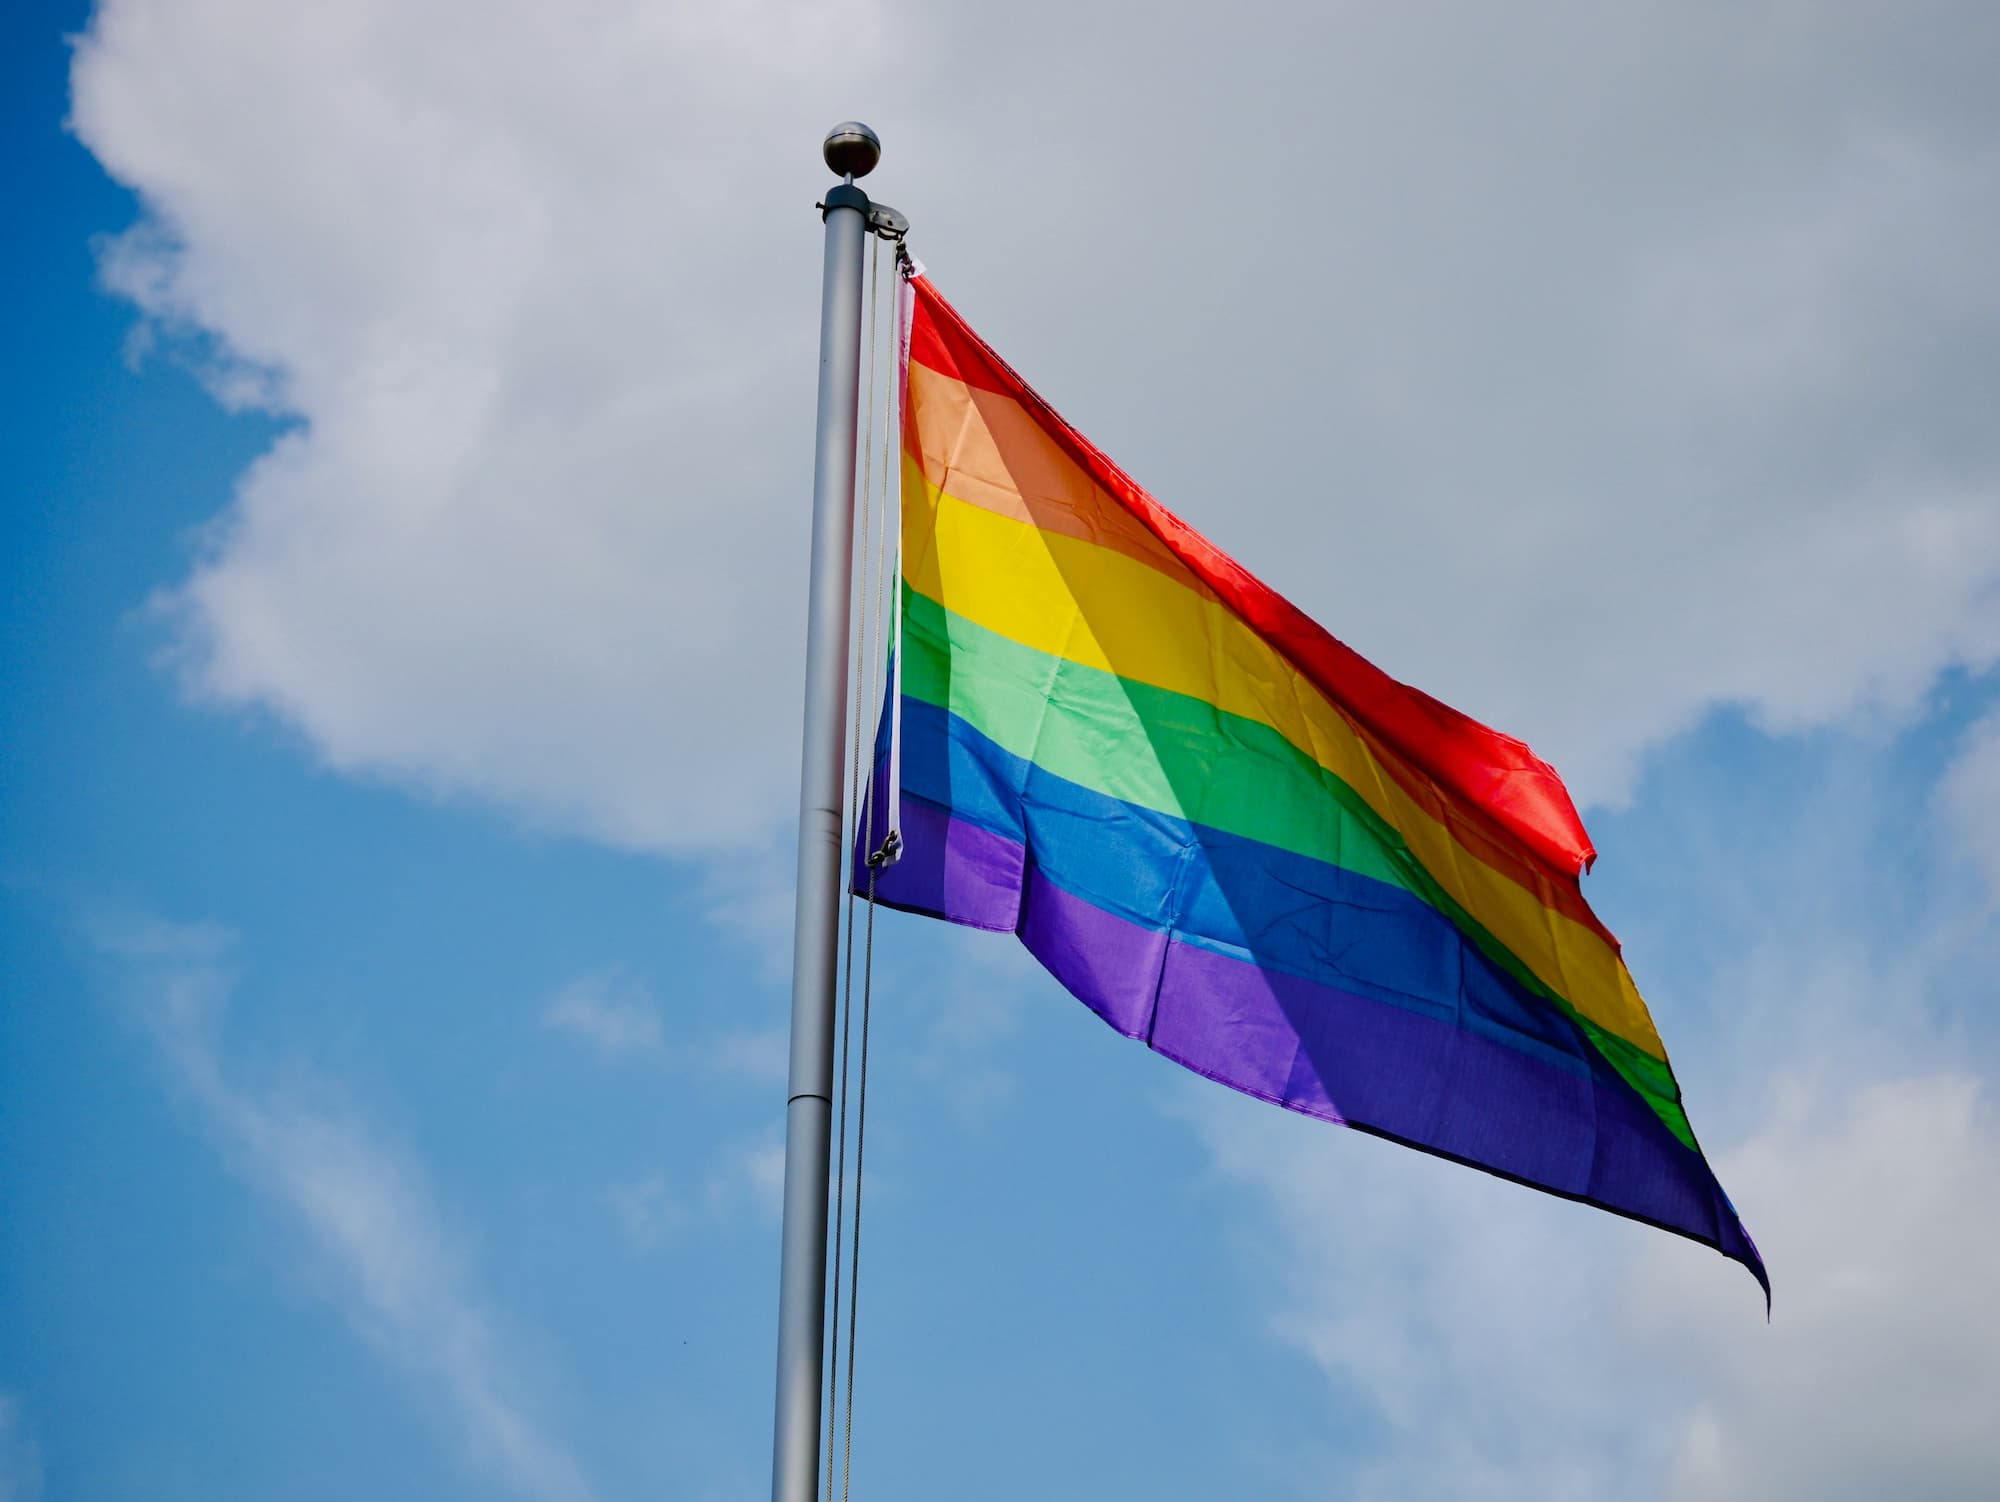 Utah school district bans 'politically charged' Pride flag from classrooms